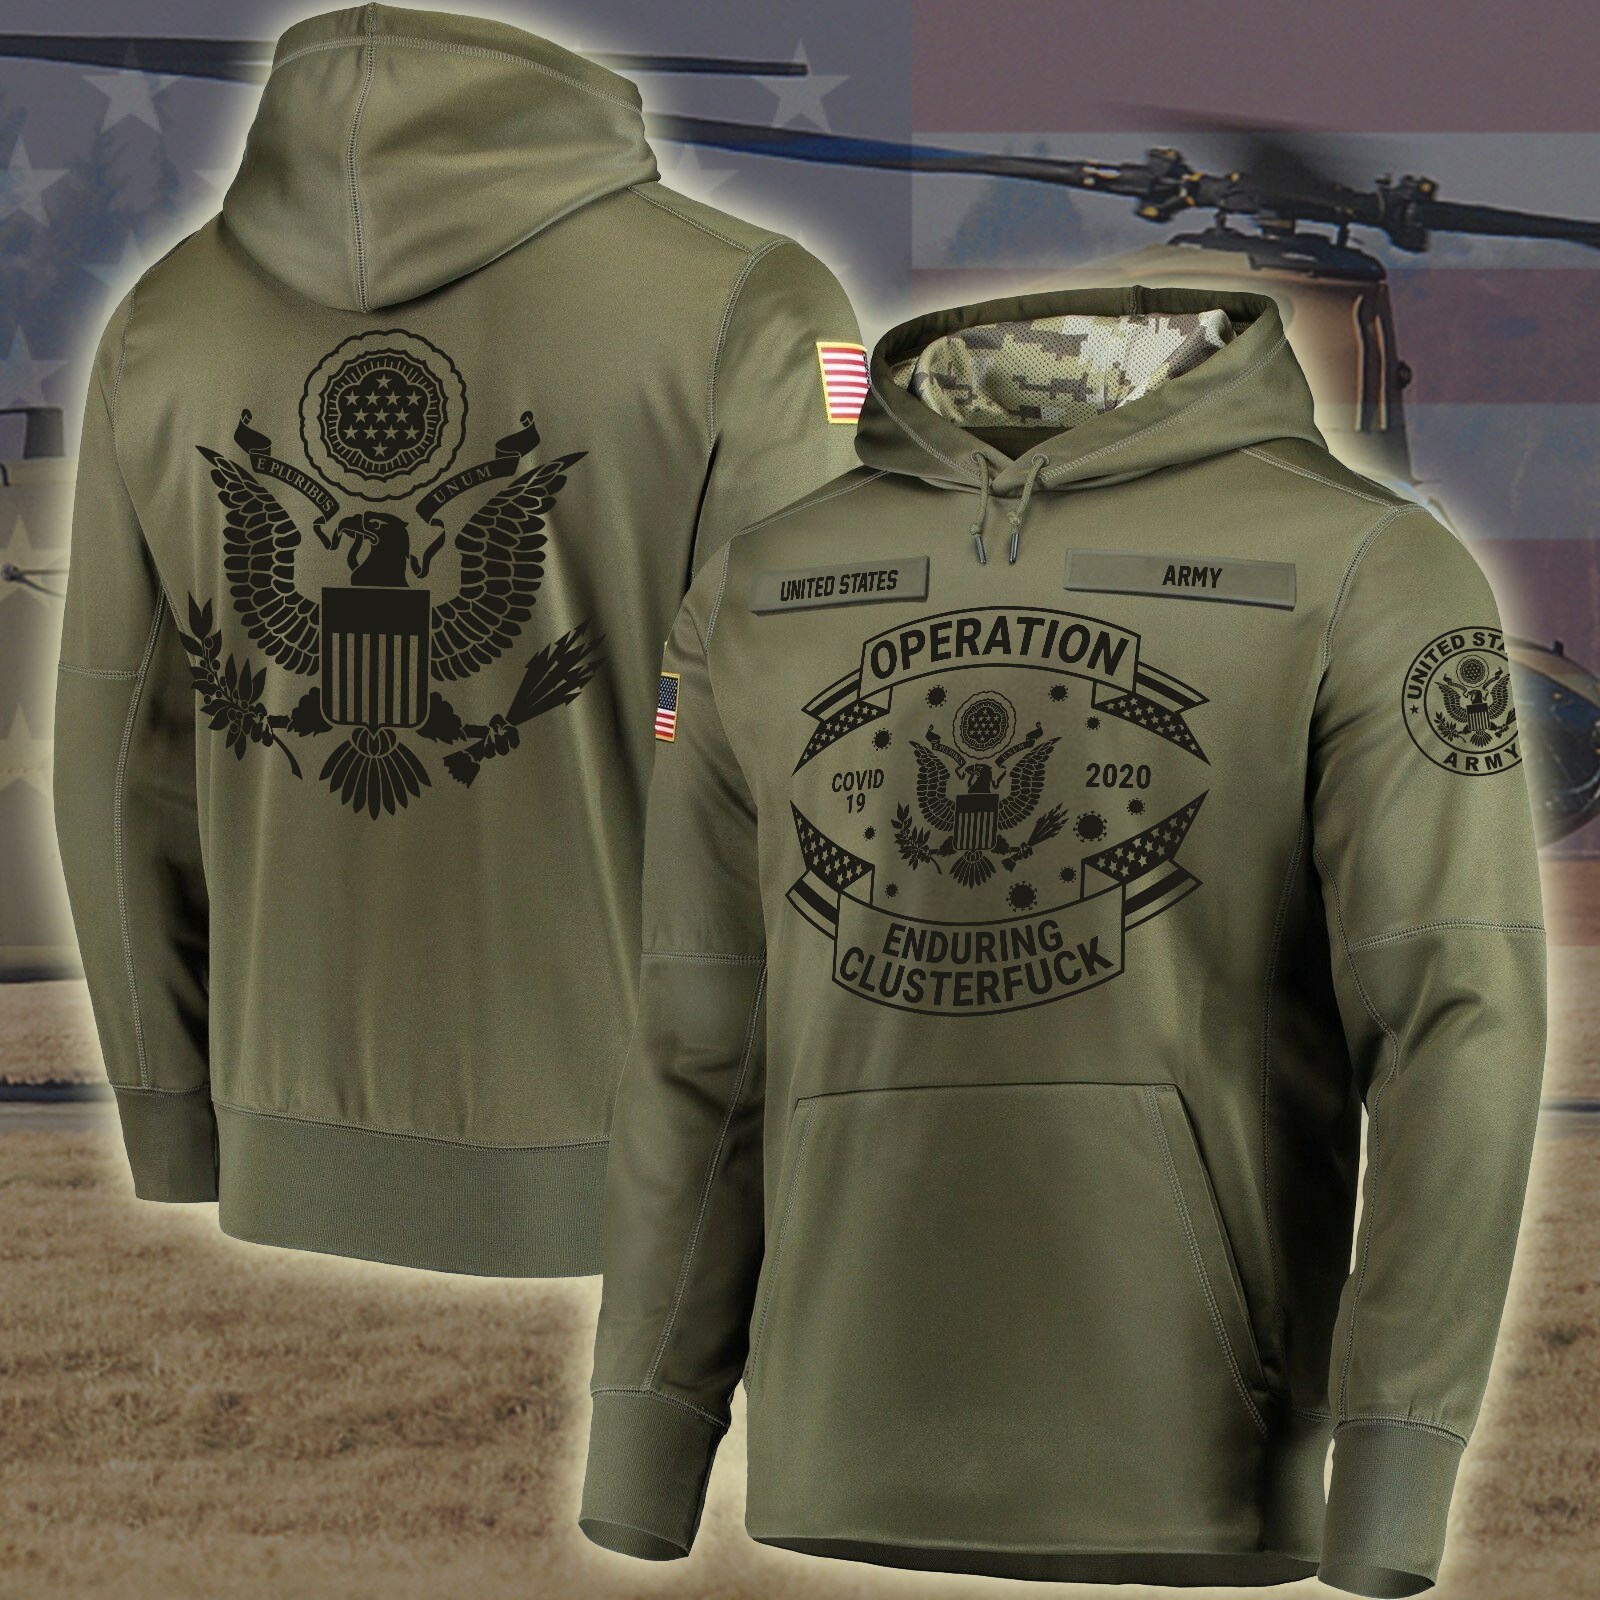 United States Army Operation Enduring Clusterfuck Personalized 3D hoodie